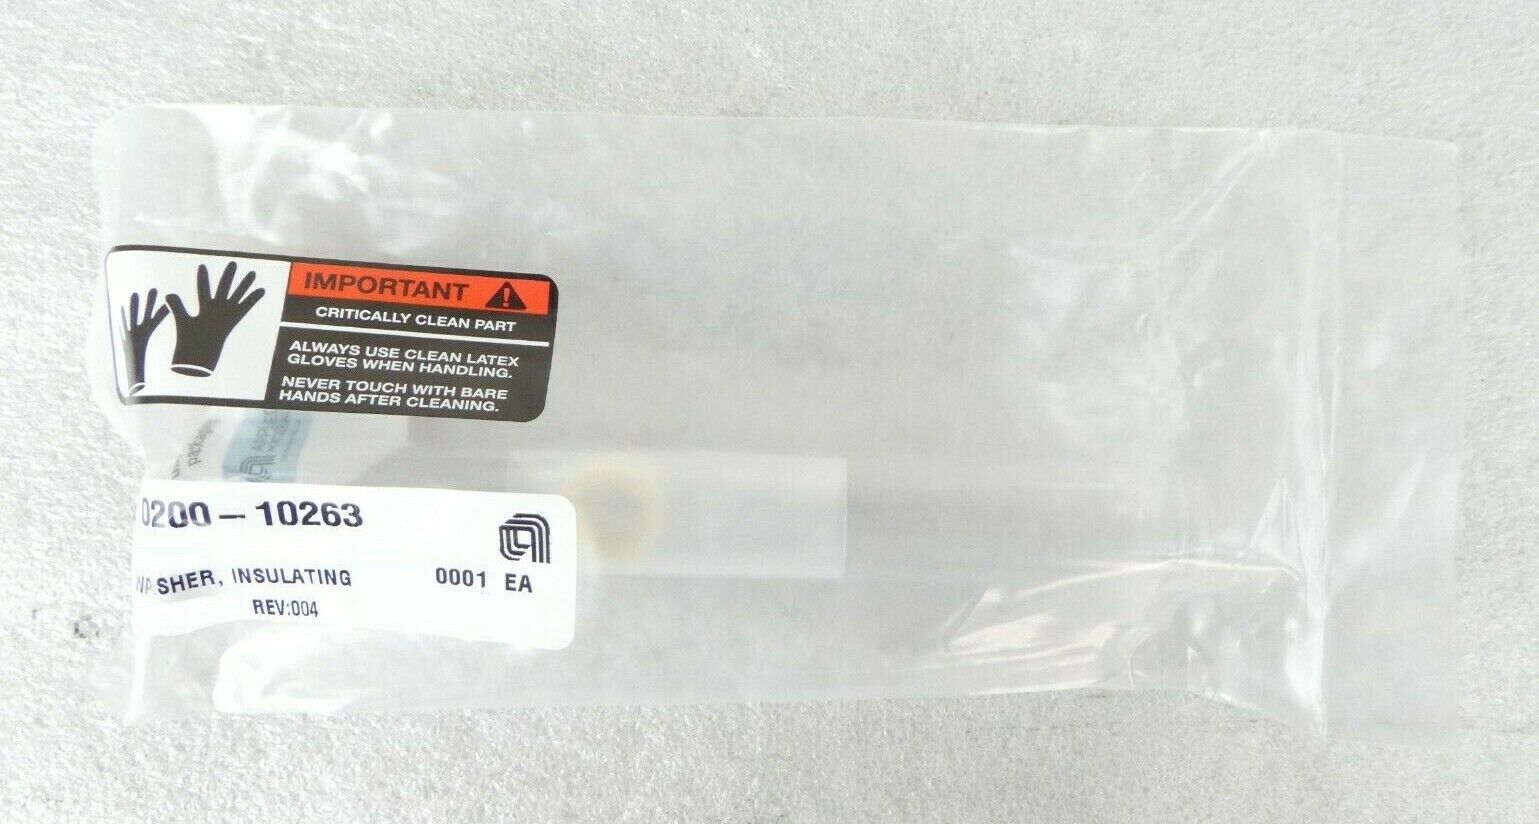 AMAT Applied Materials 0200-10263 Ceramic MXP+ Cathode Washer Lot of 4 P5000 New